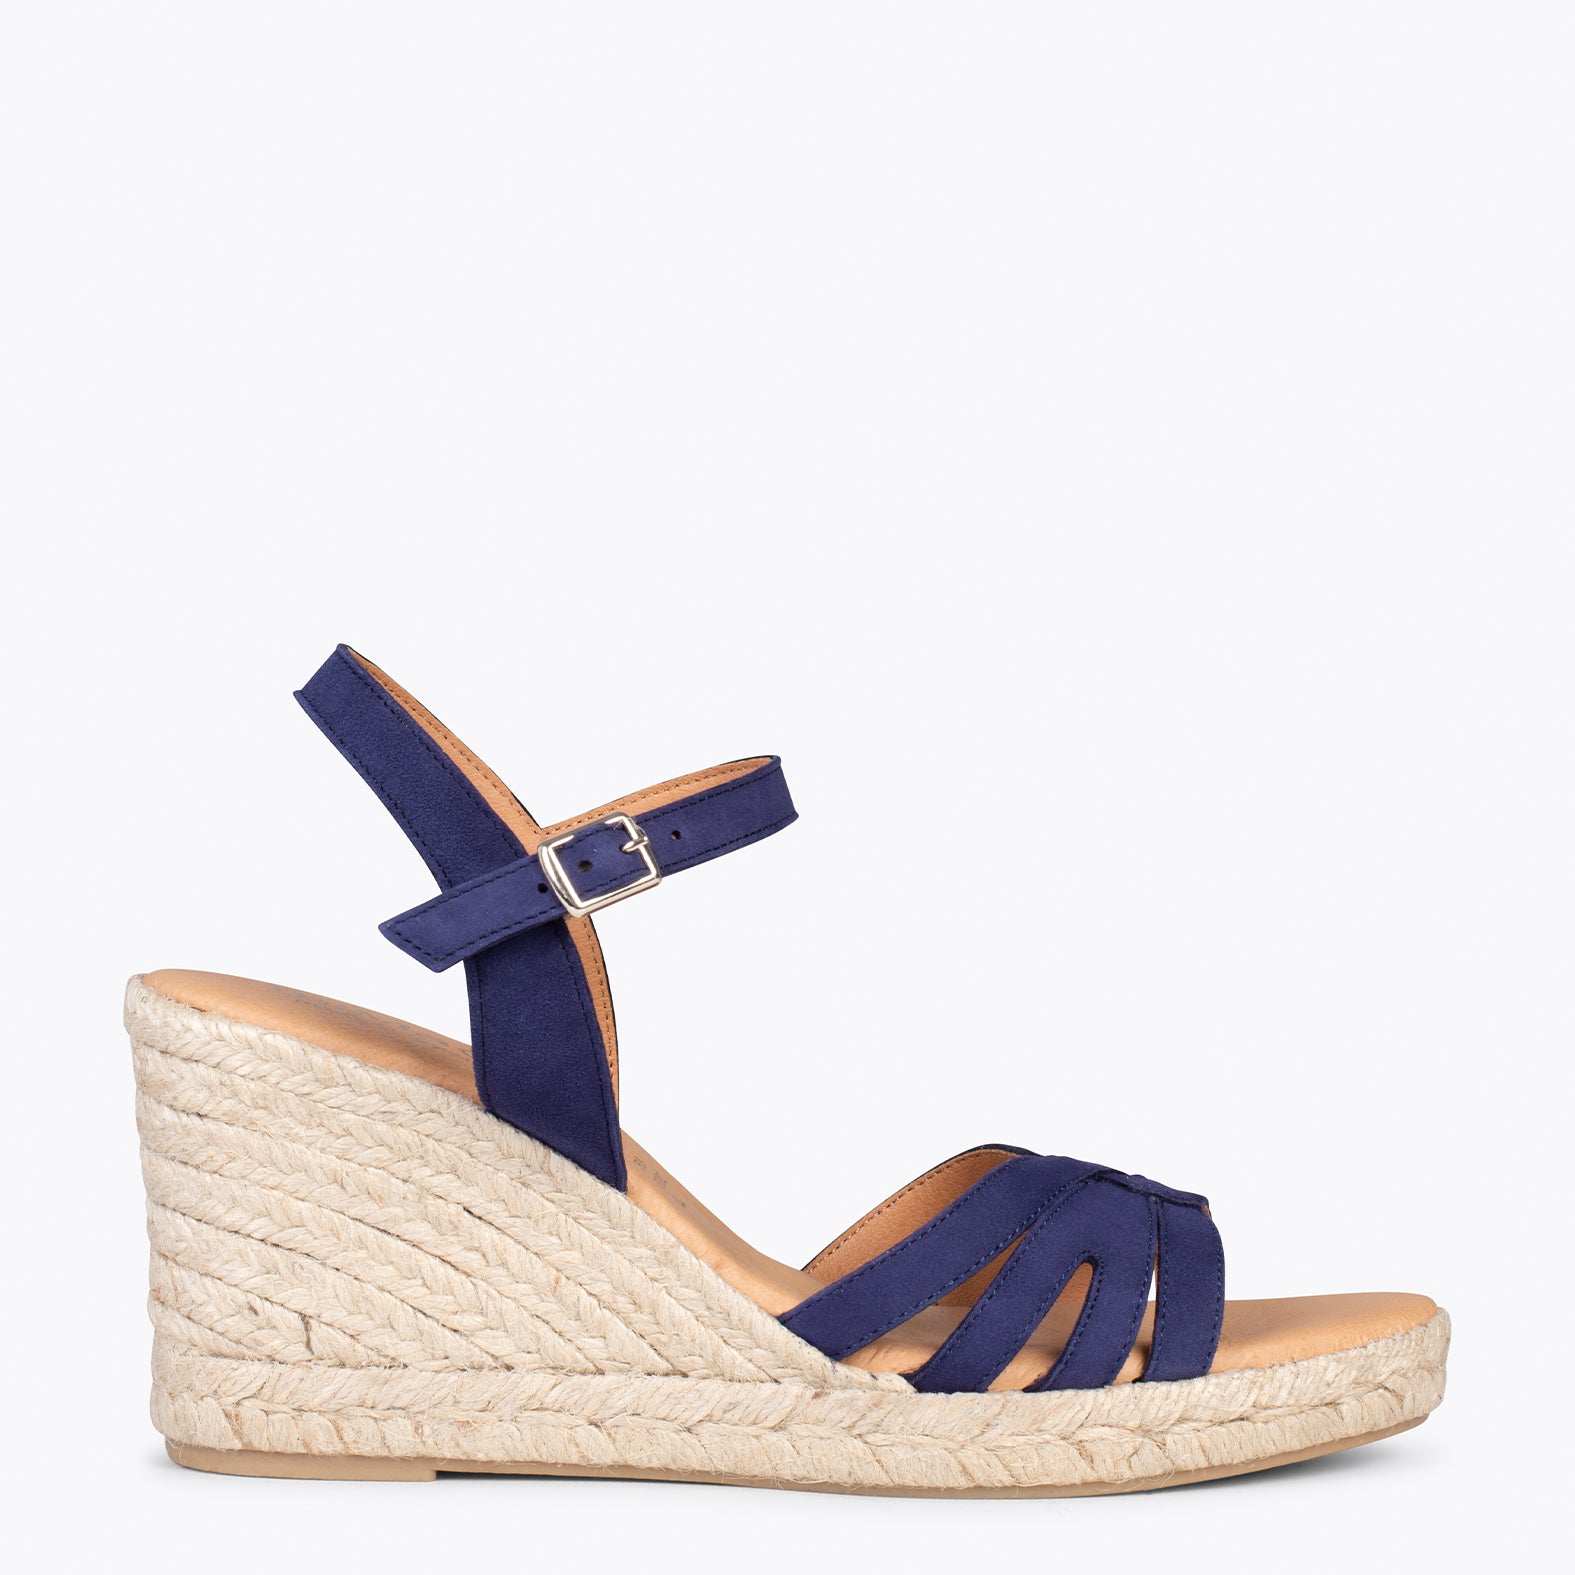 HOYAMBRE – NAVY espadrilles with braided front